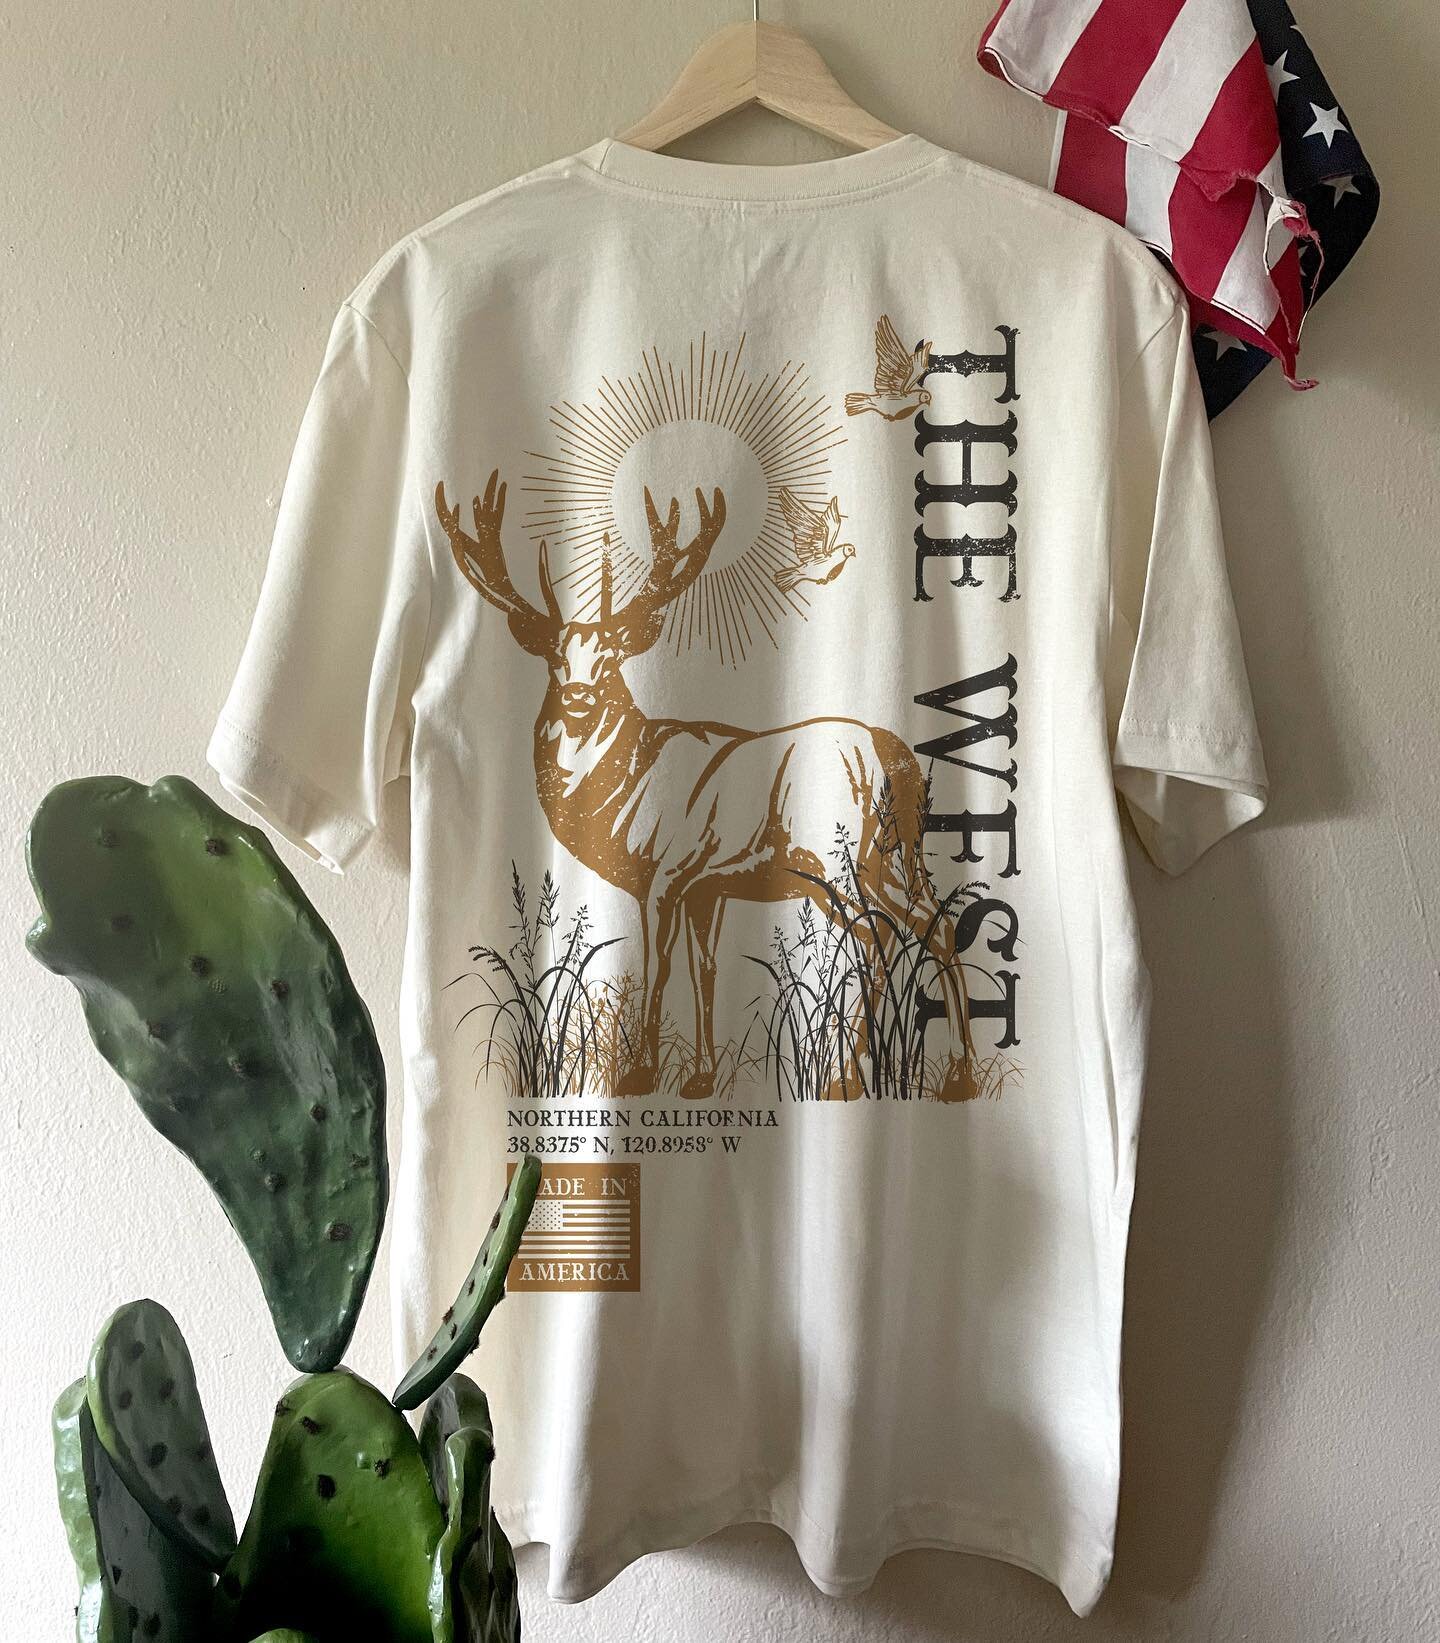 🇺🇸 Made In America 

Apparel made in the USA. Designed in Durham California. 

#thewesternsunrise #madeinusa #madeinamerica #graphictee #kidsclothes #womensfashion #cowboyculture #californiacowboy #themodernwest #westernwear #mensshirts #vintageins